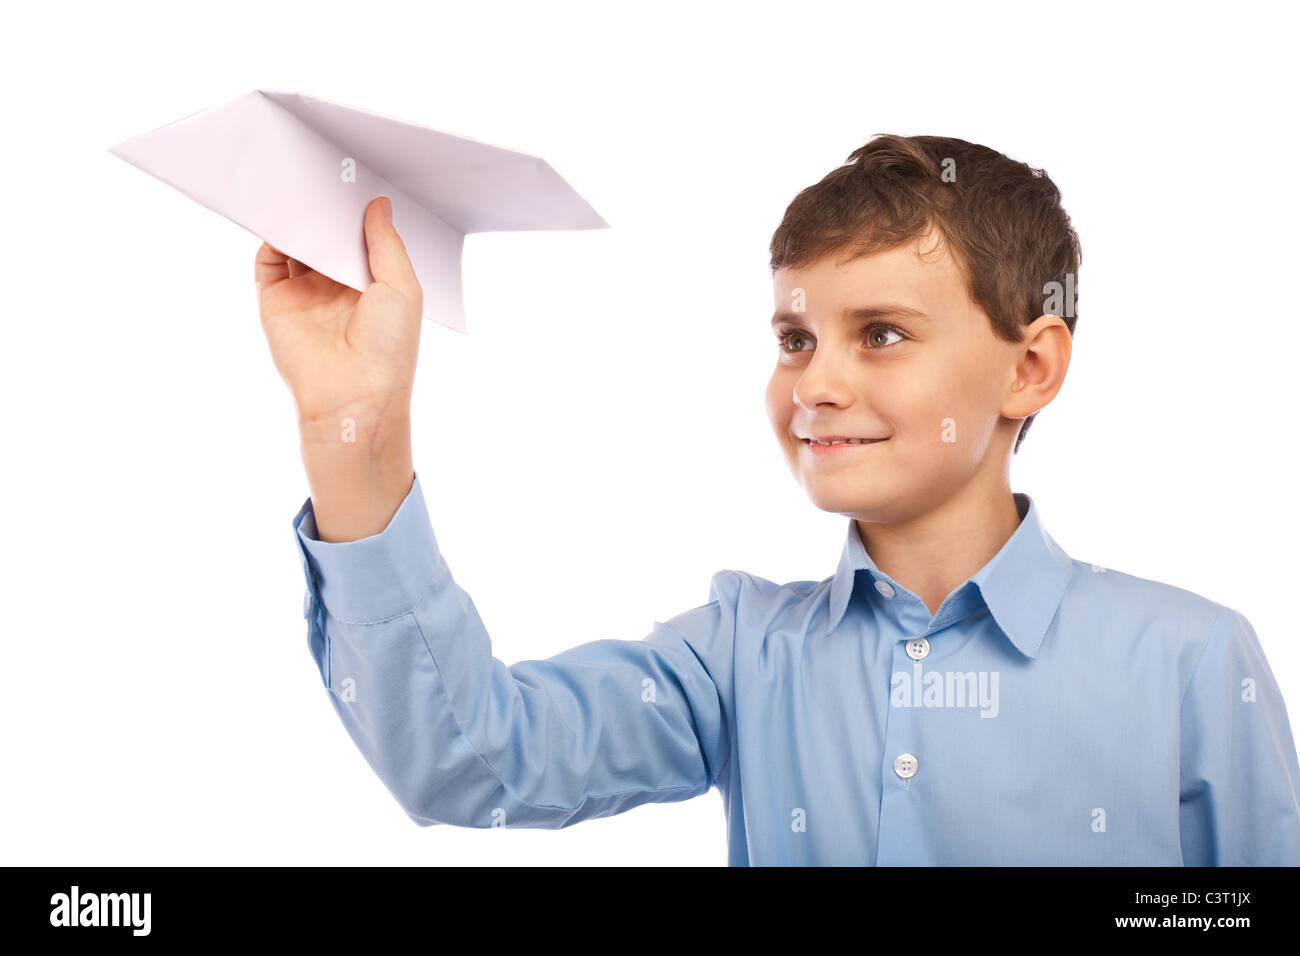 Schoolboy throwing a paper plane, isolated on white background Stock Photo